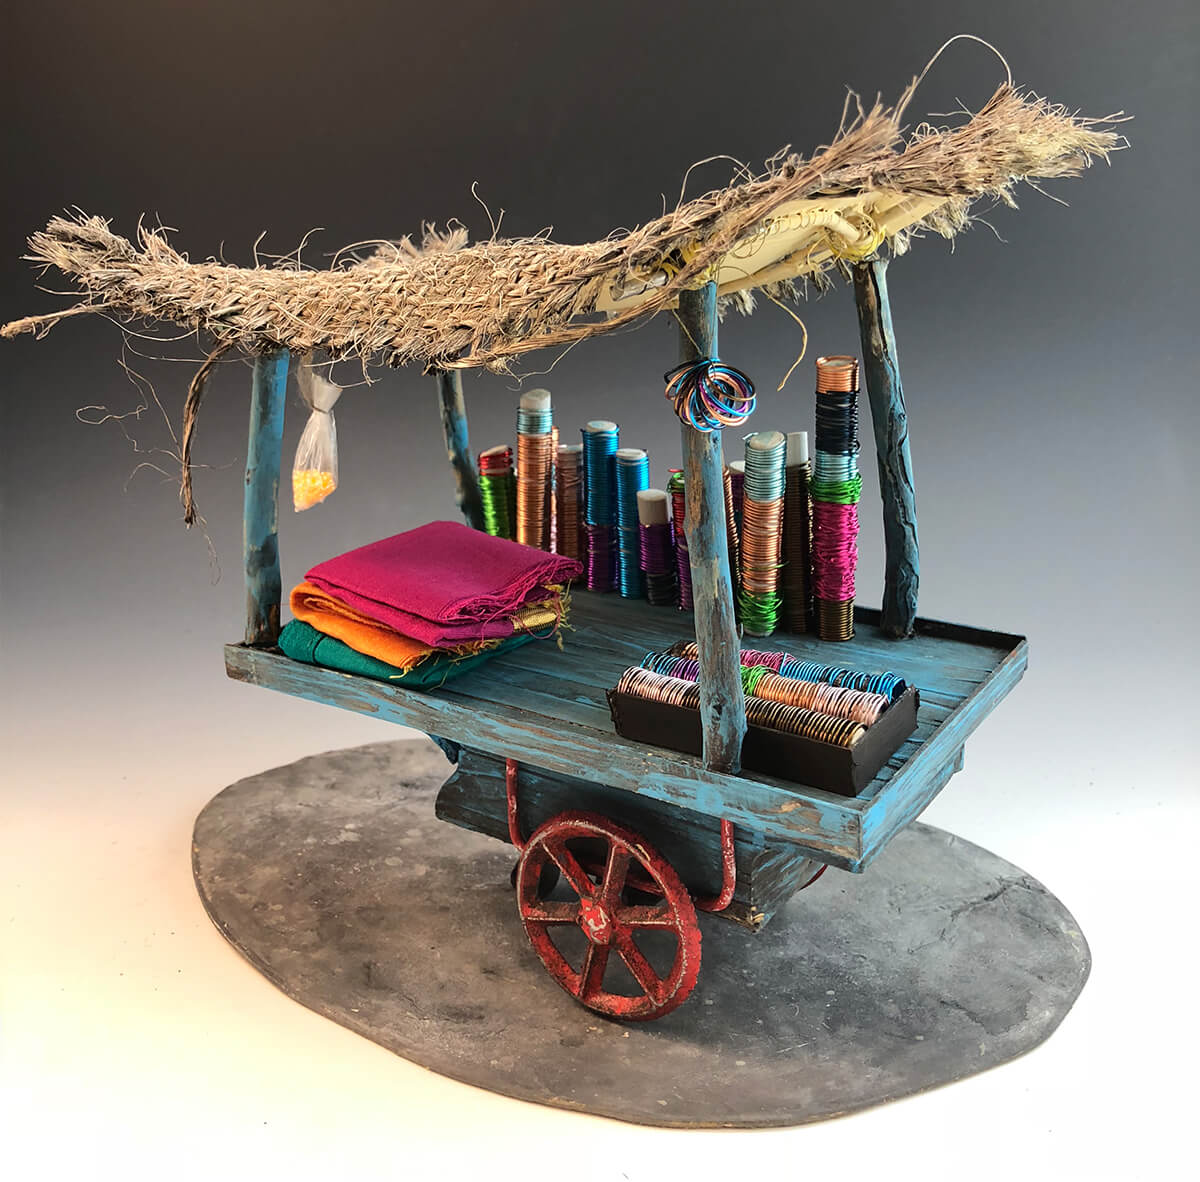 A textile cart model by student Shannon Parayil.